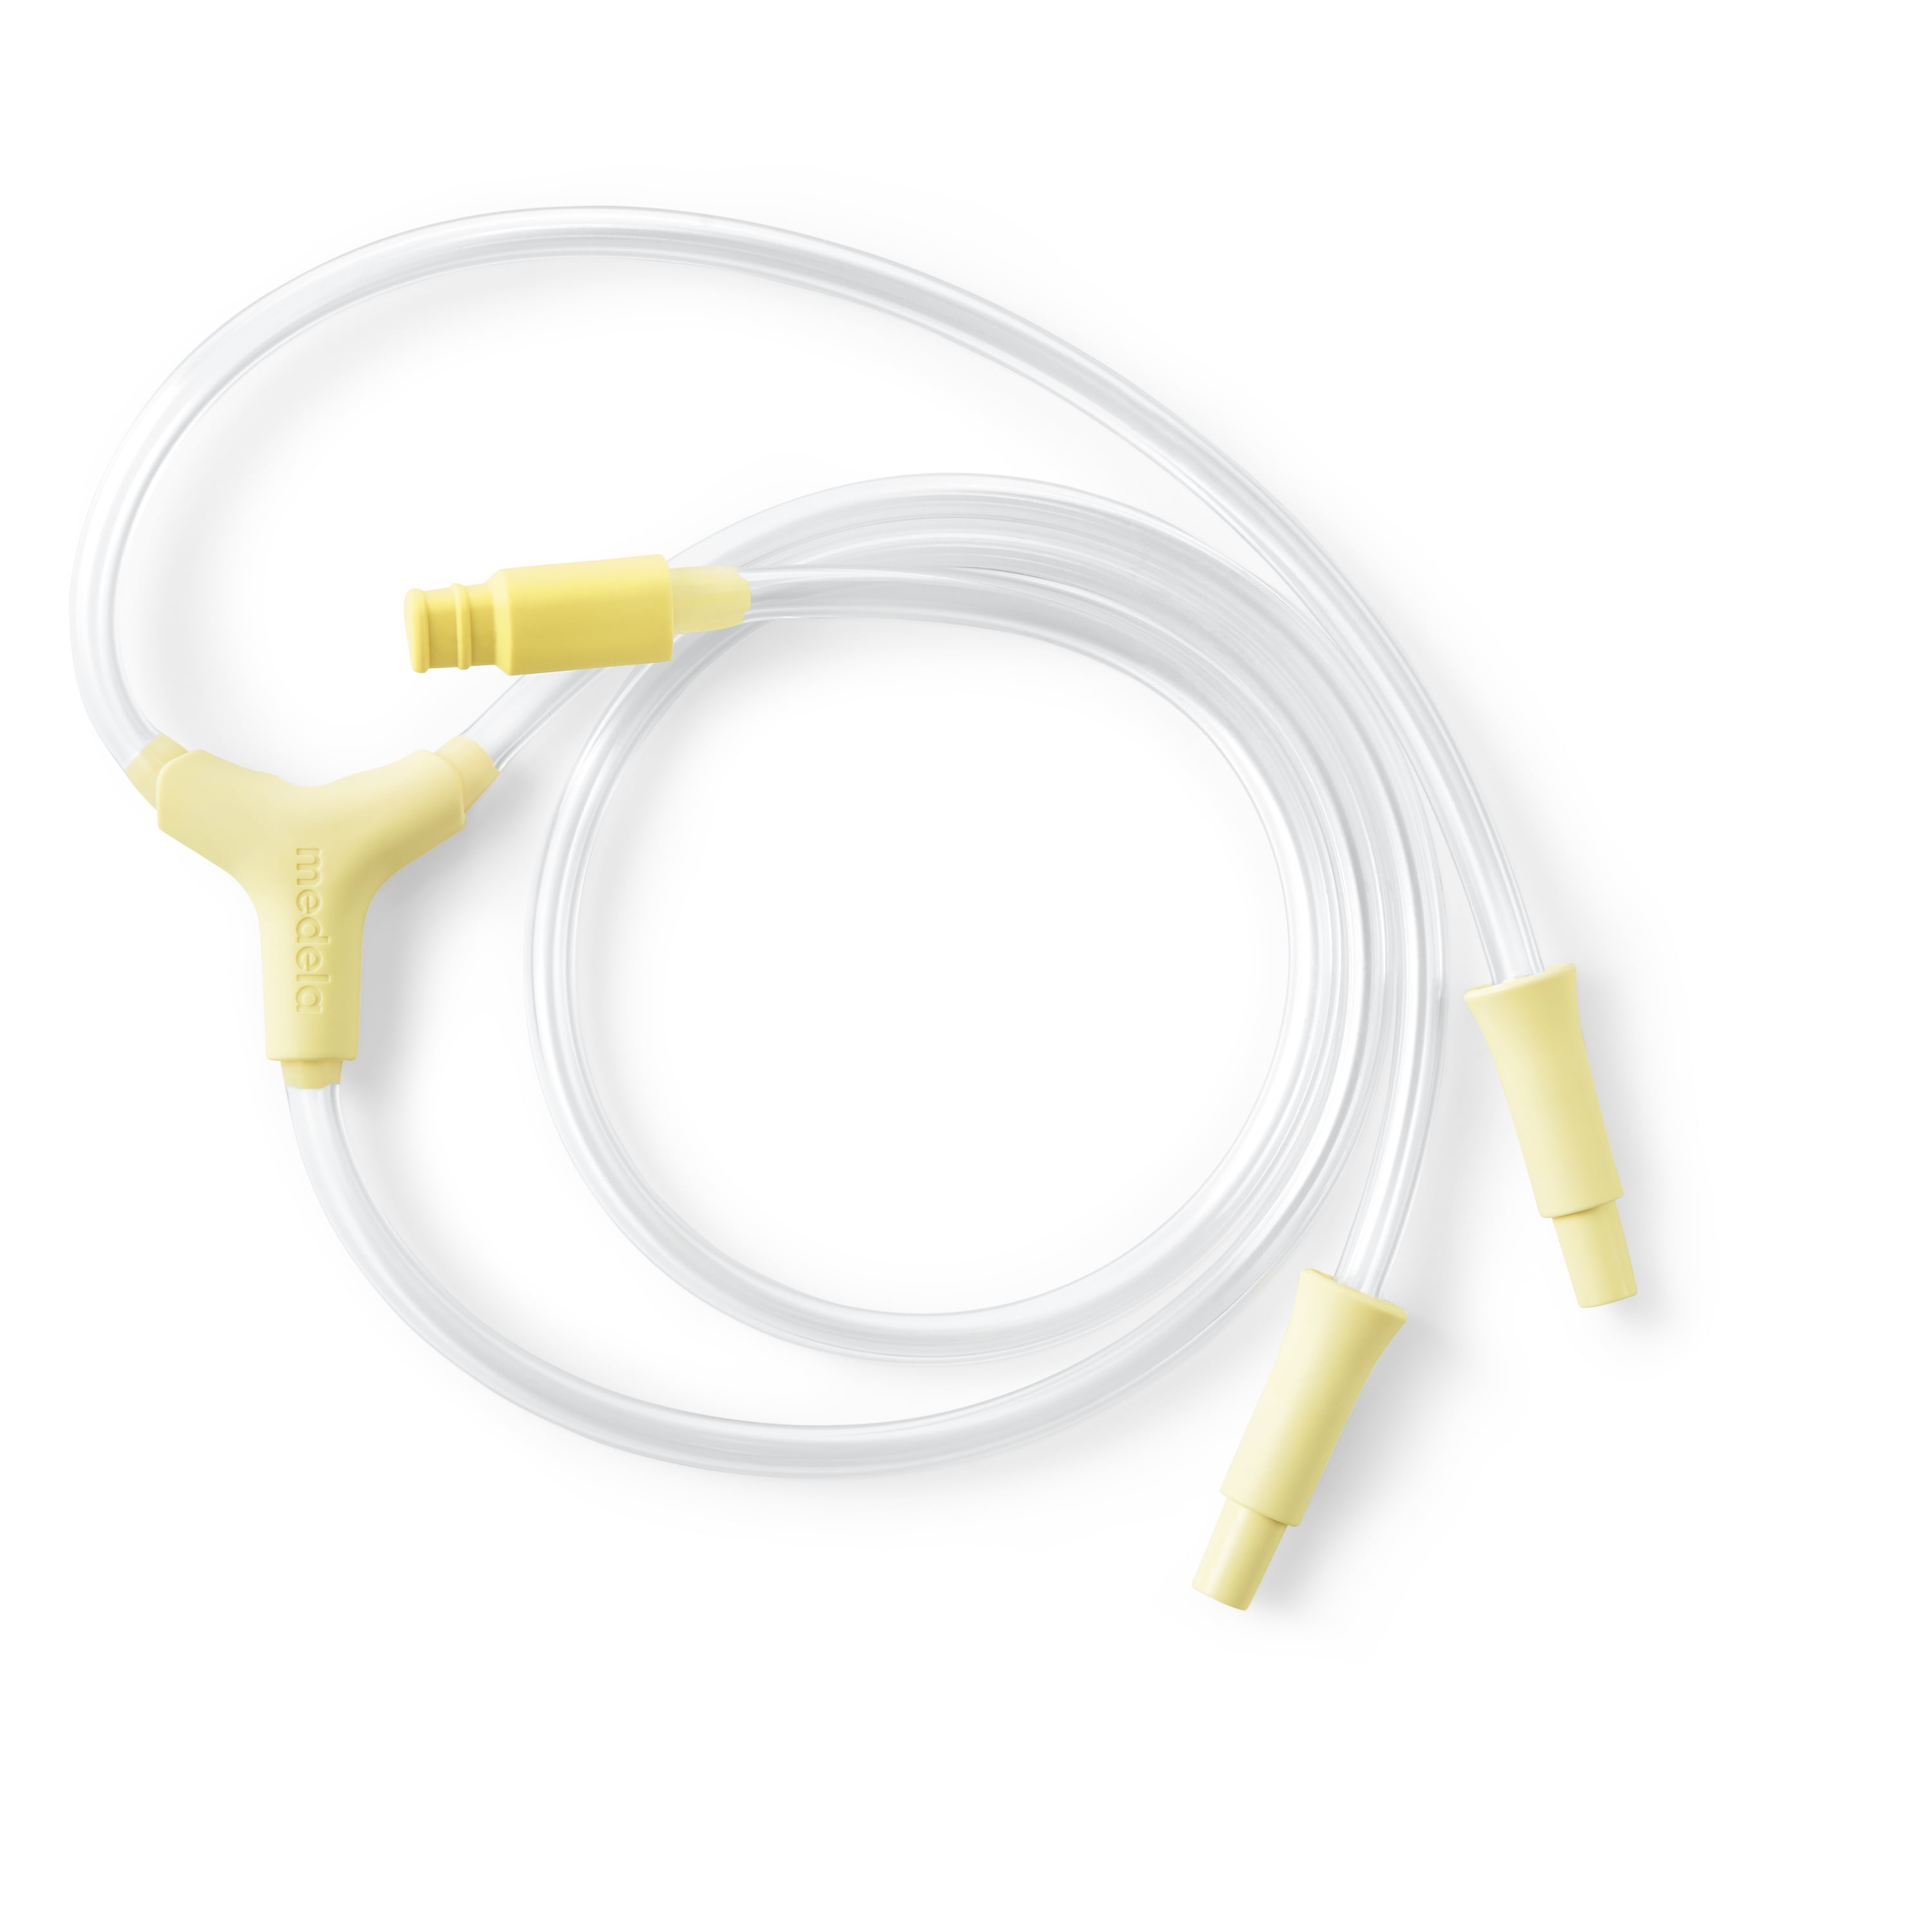 Replacement Tubing Set for Medela FreeStyle Breastpump Made by Maymom 